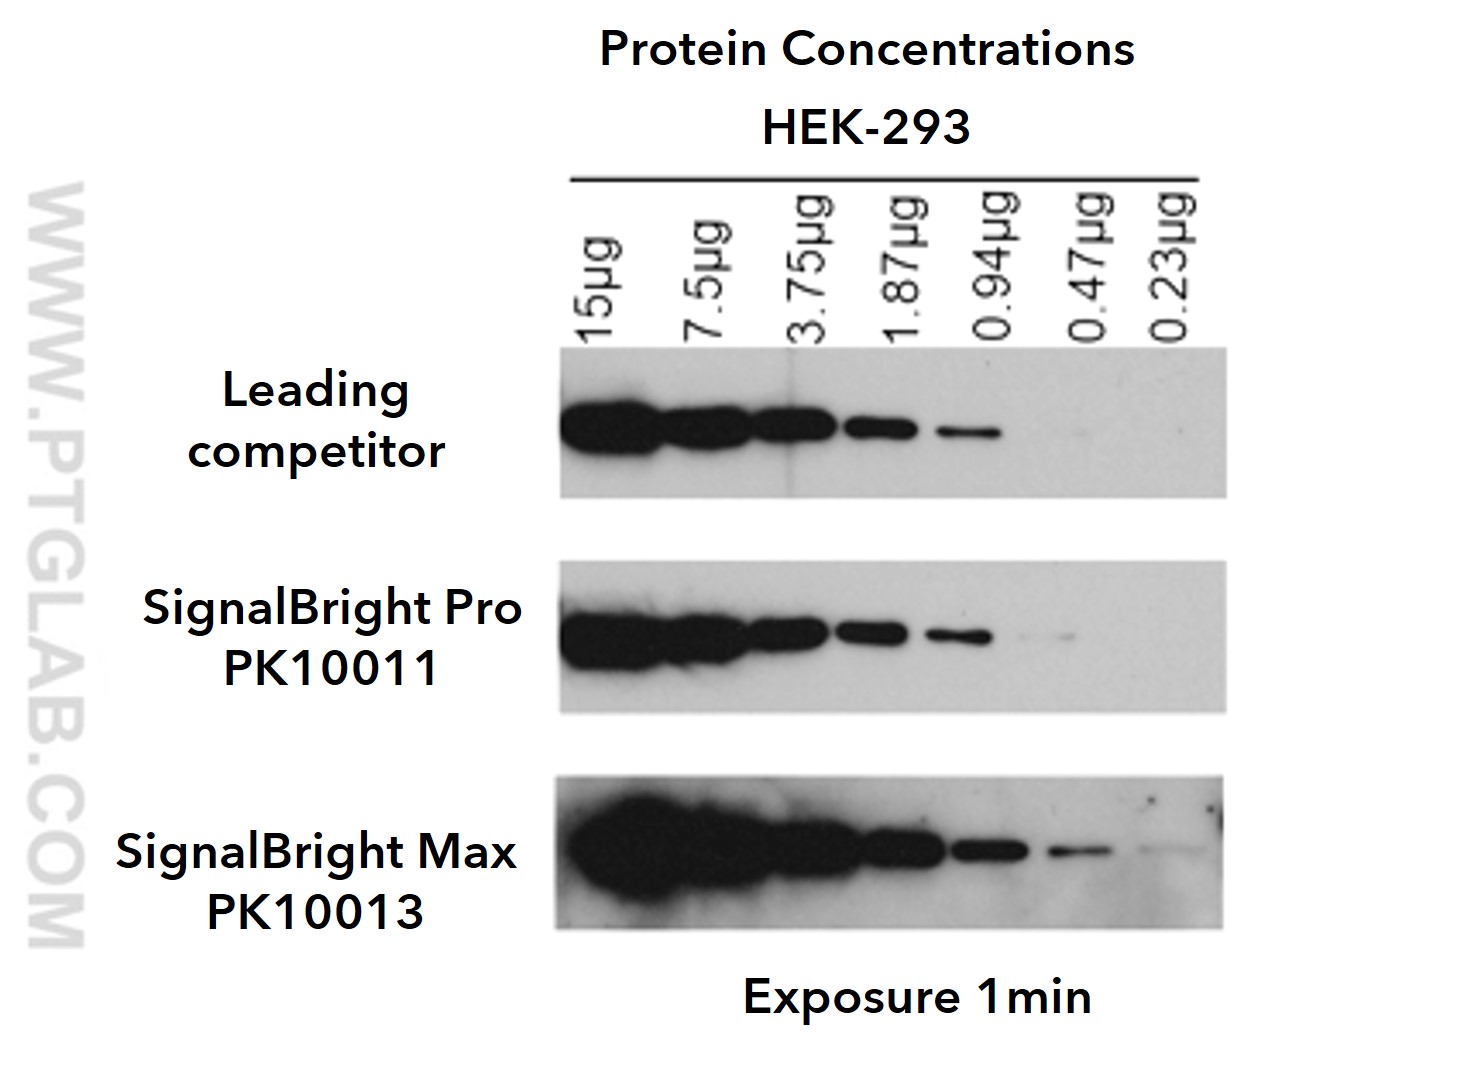 Serial dilutions of HEK-293 cell lysates
<br>Primary: Proteintech RUVBL1 (10210-2-AP); 1:8,000
<br>Secondary: Proteintech HRP-conjugated Affinipure Goat Anti-Rabbit IgG (SA00001-2); 1:6,000
<br>Exposure time: 1 min 
<br>Chemiluminescent substrates from leading competitor, SignalBright Pro (PK10011), SignalBright Max (PK10013)